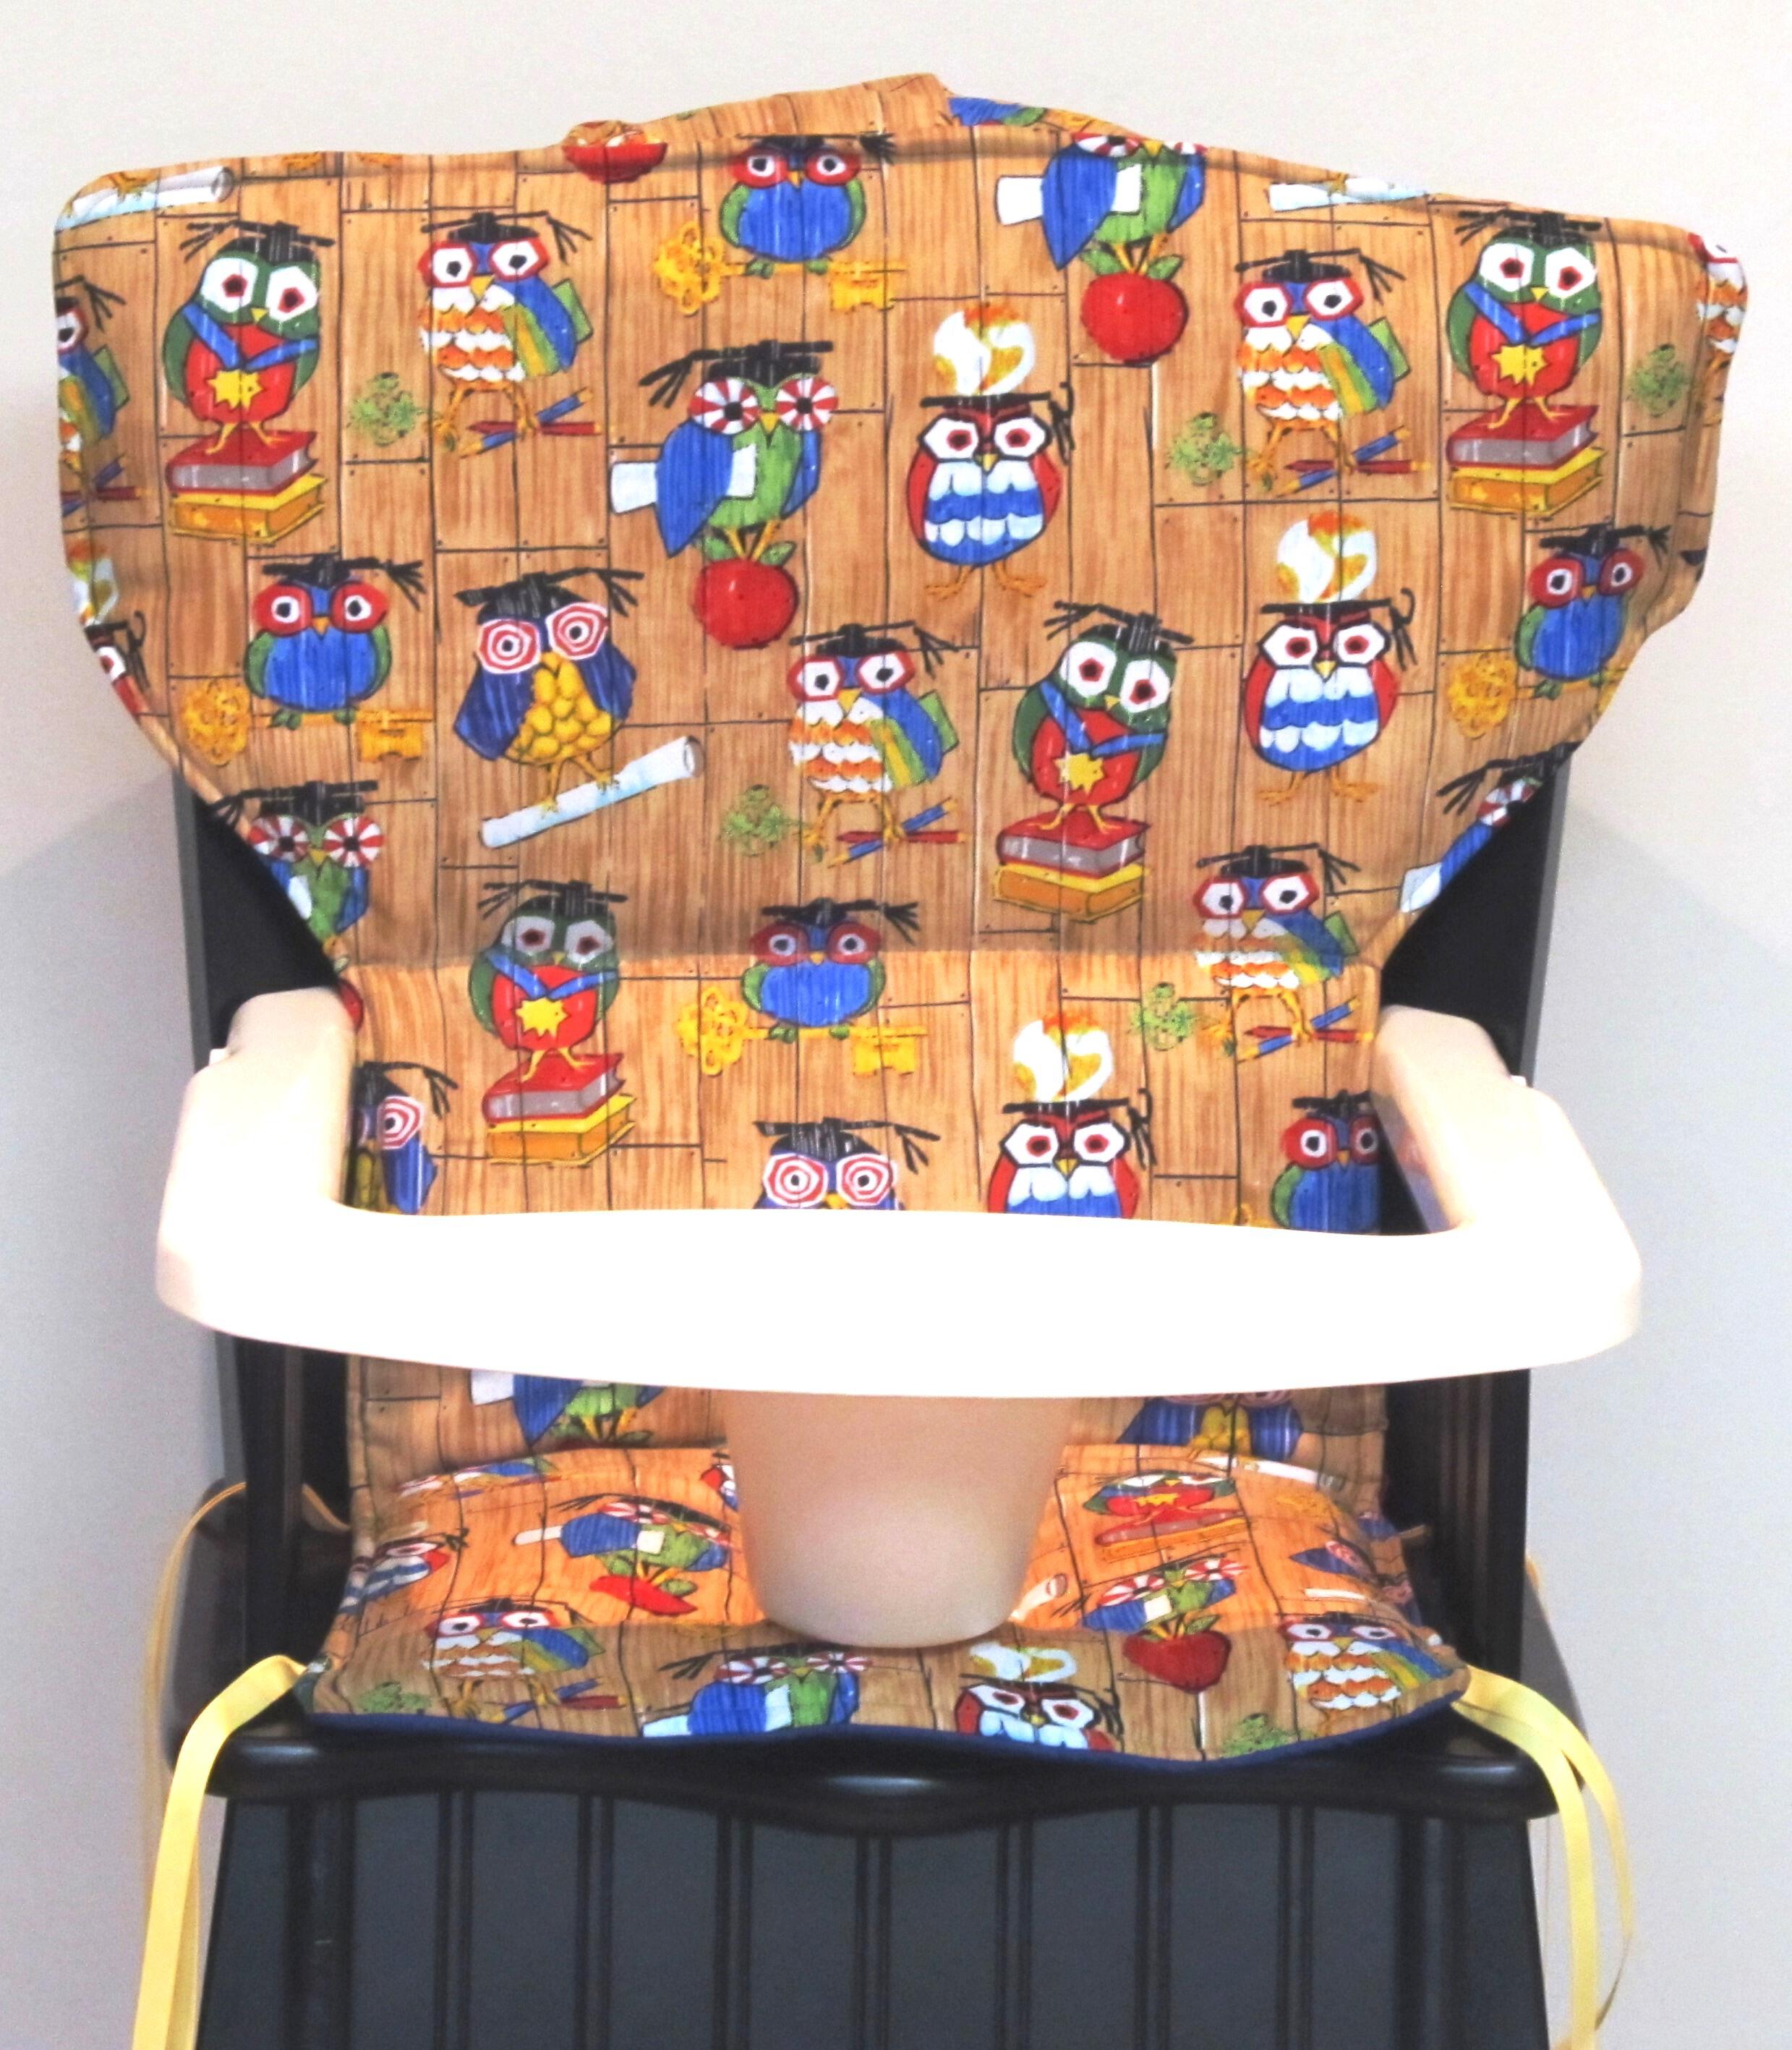 Newport style Eddie Bauer wooden highchair cushion, handmade in the USA, who's so smart ?